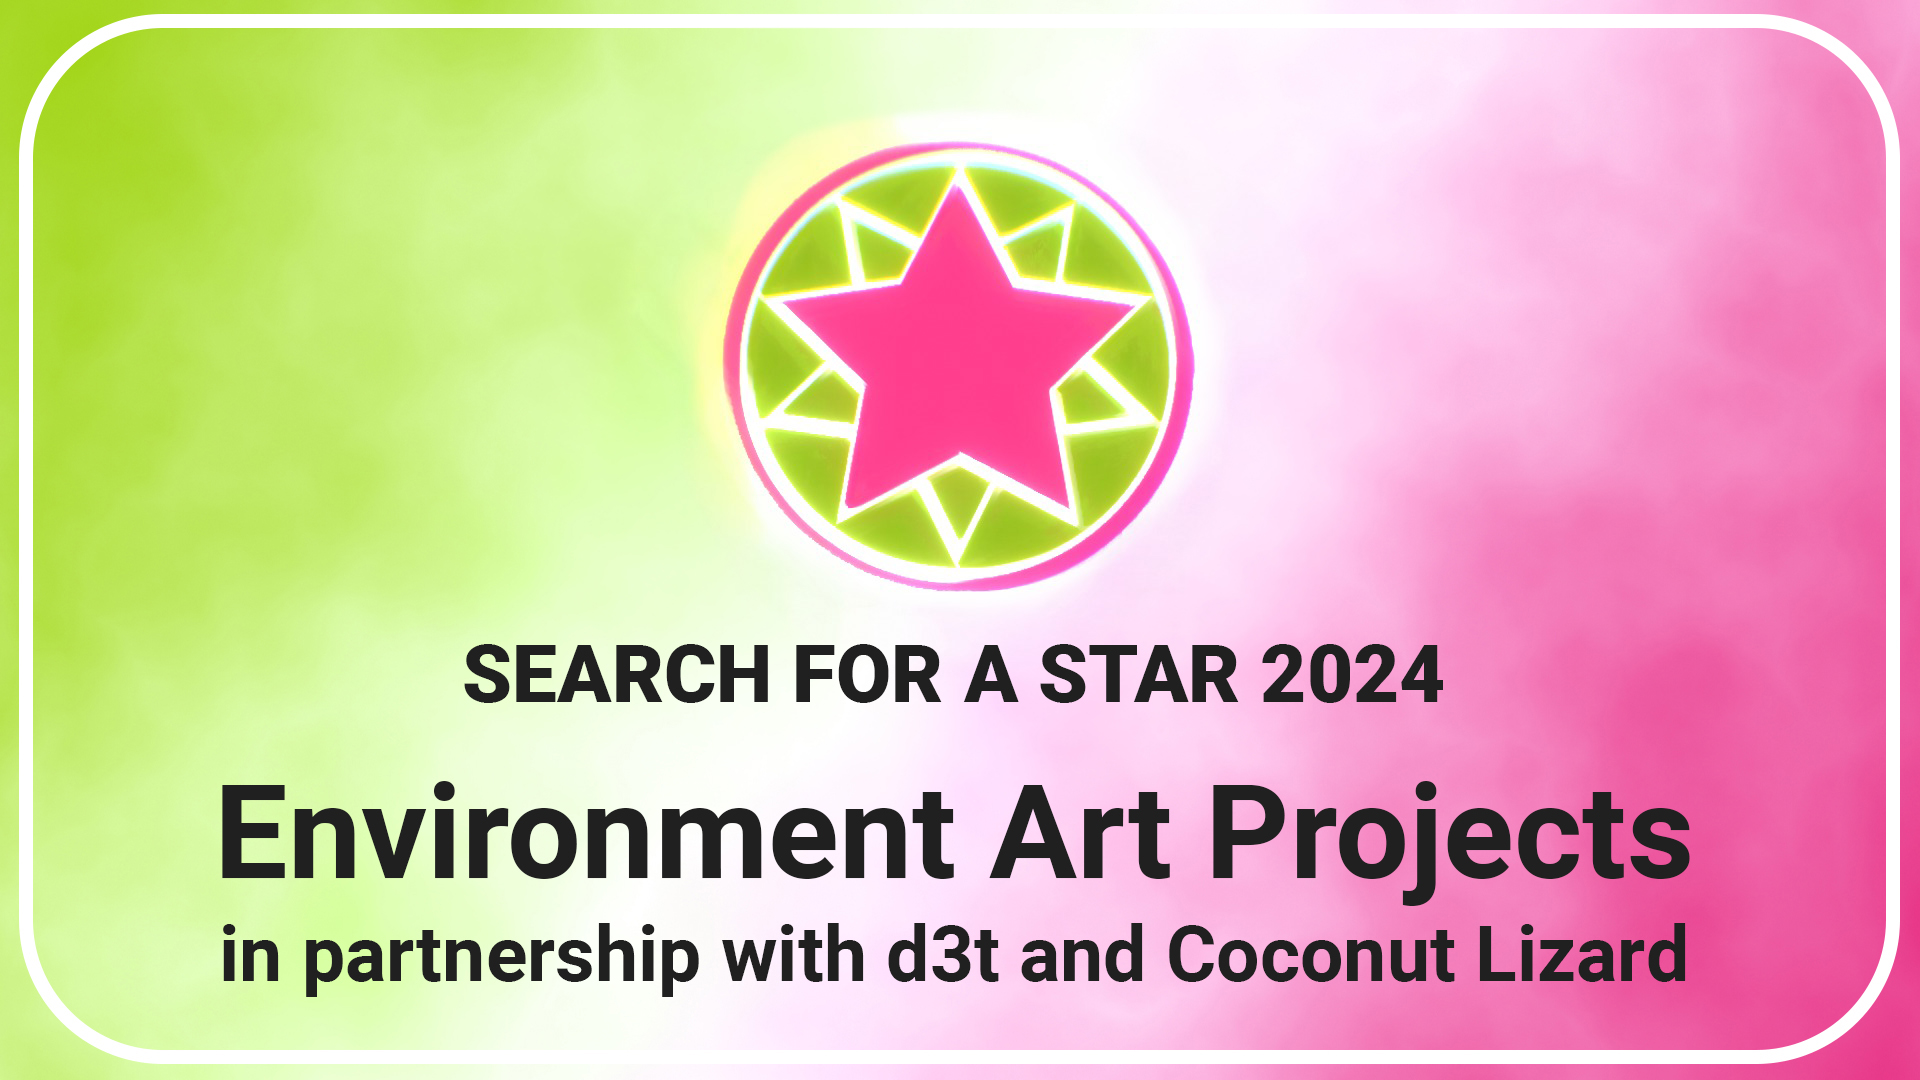 Environment Art Projects | Search For A Star 2024